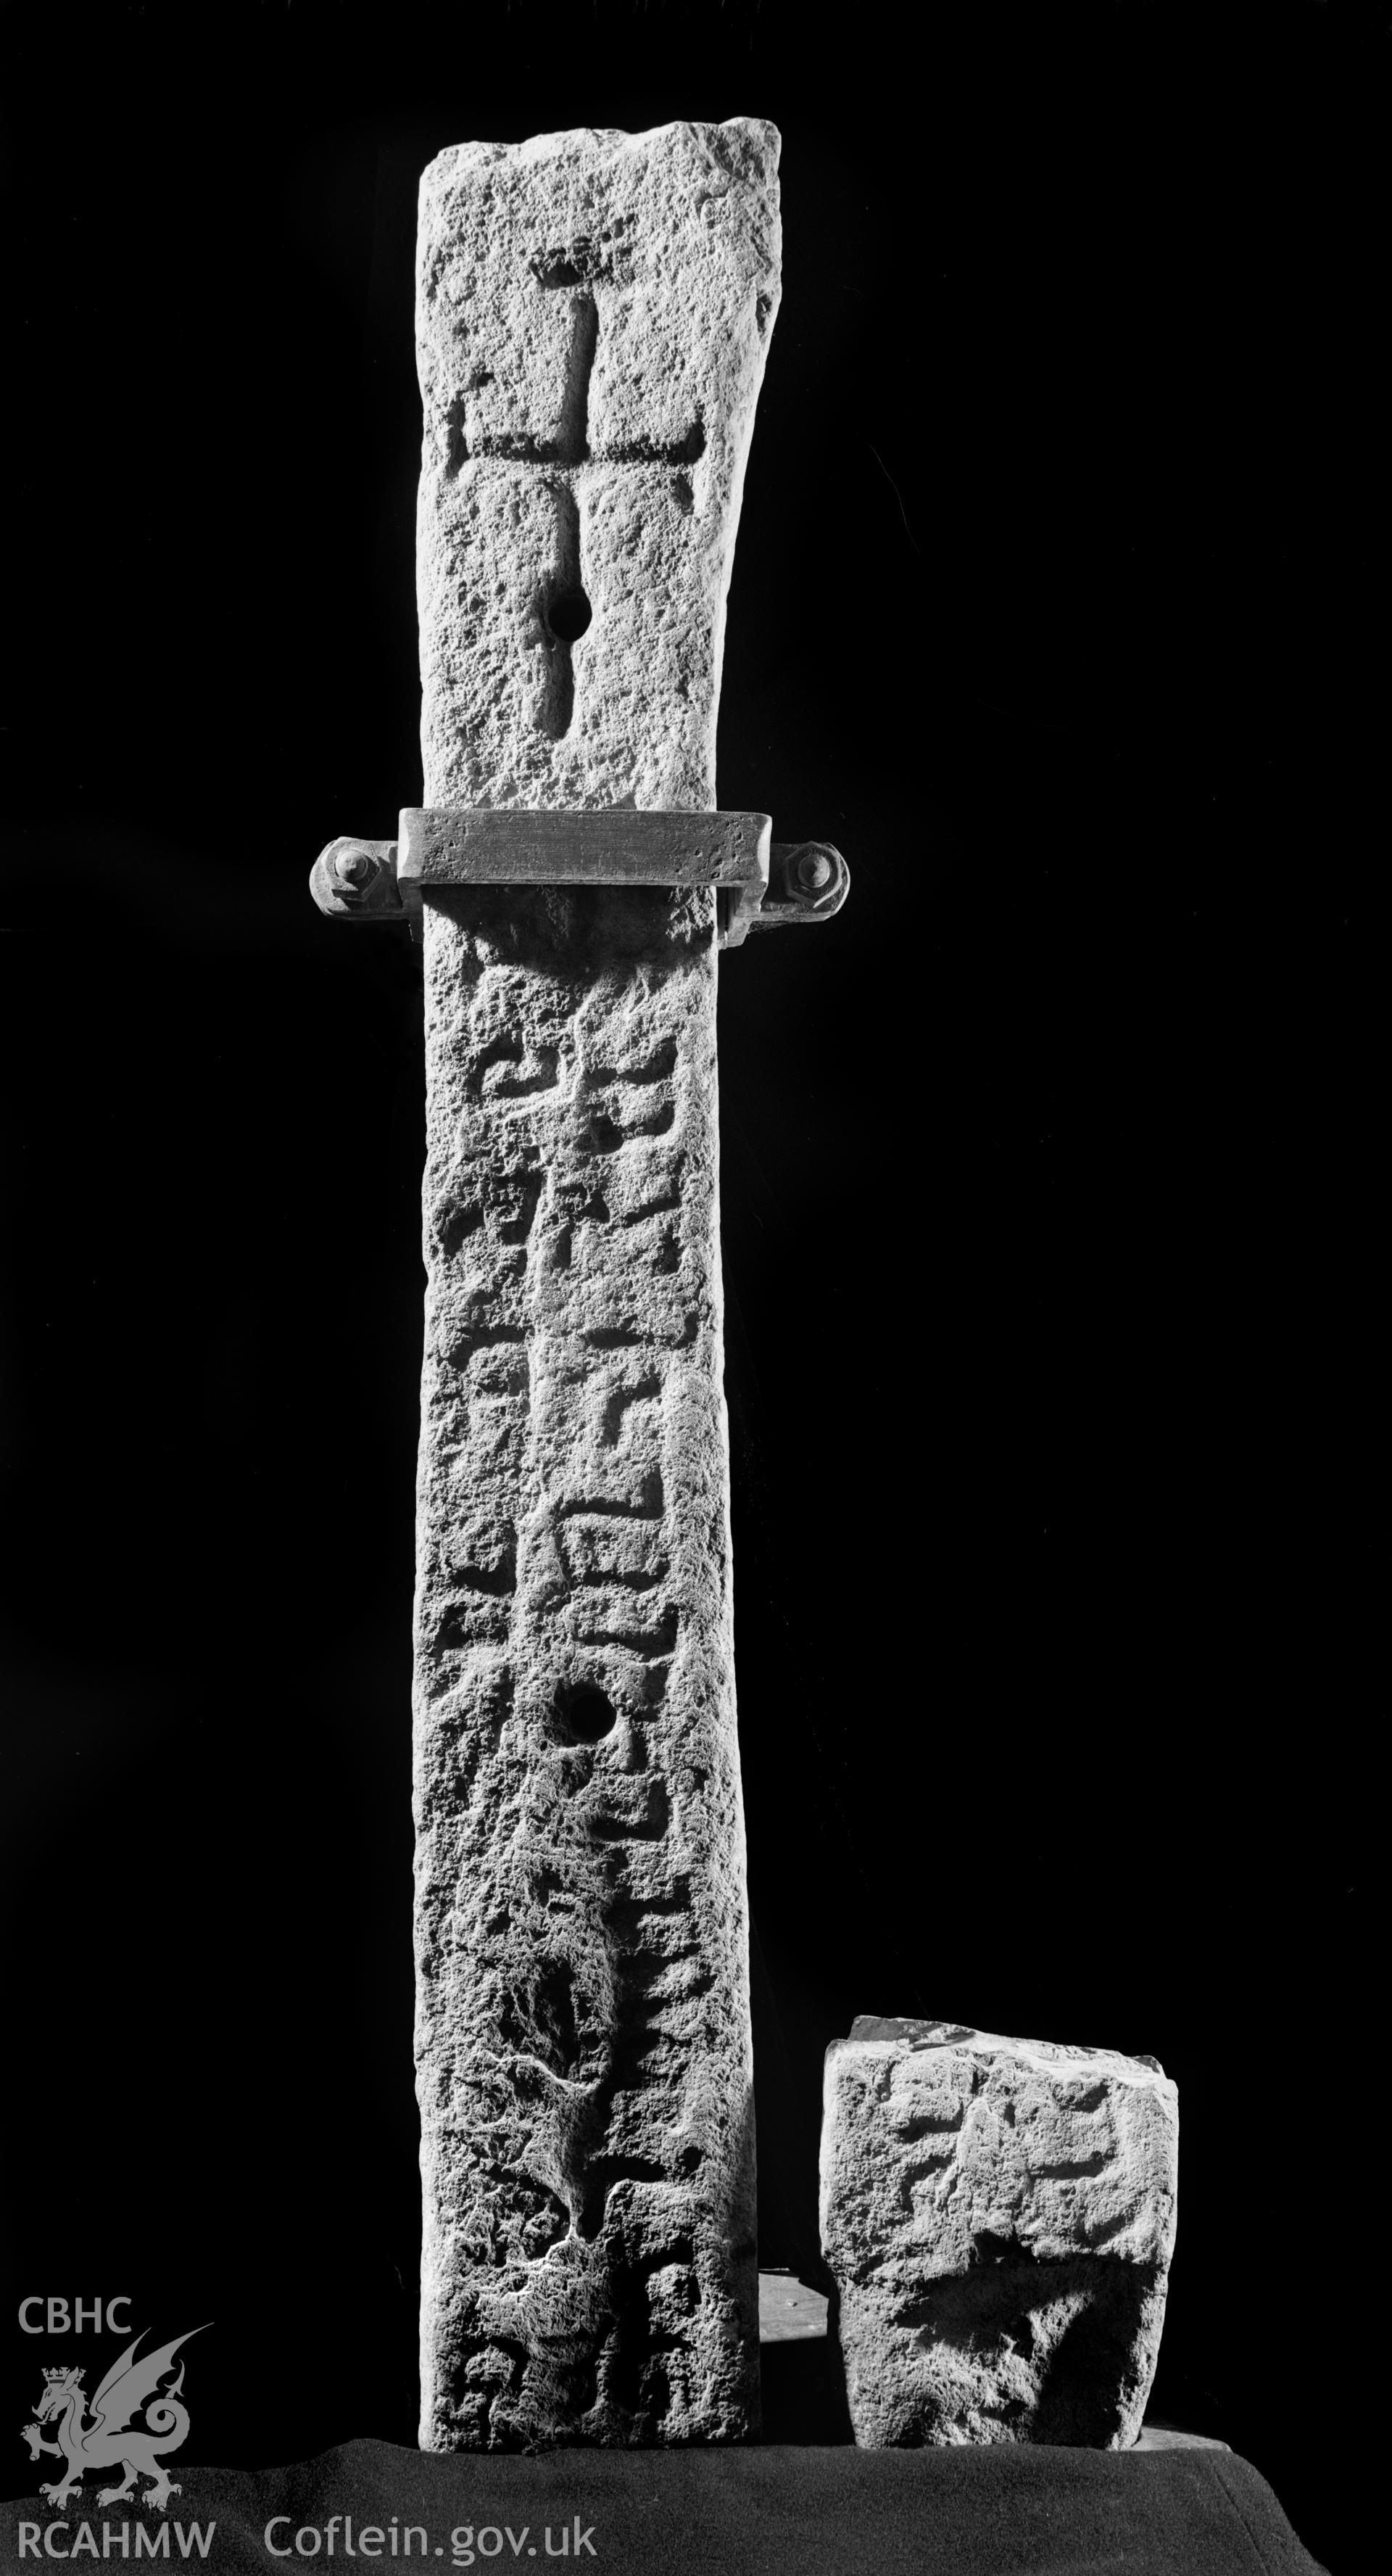 Black and white photograph of cross-carved stone with roman-letter inscription, St. Cadfan's Church, Tywyn: Corpus of Early Medieval Inscribed Stones and Stone Sculpture in Wales, Volume III, North Wales, Figure MR25.1, p.424.